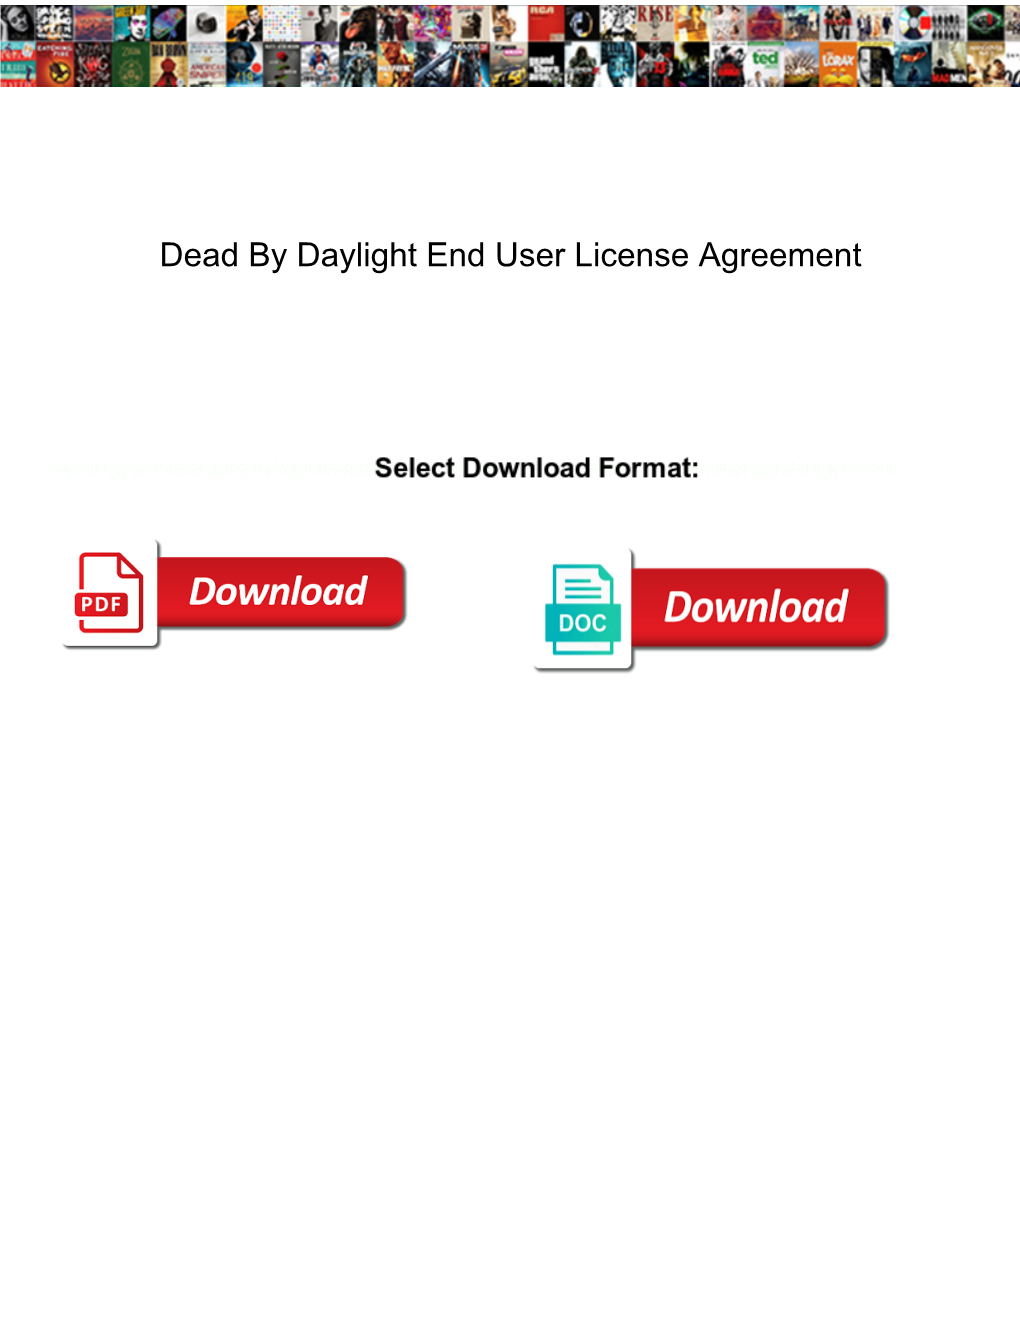 Dead by Daylight End User License Agreement